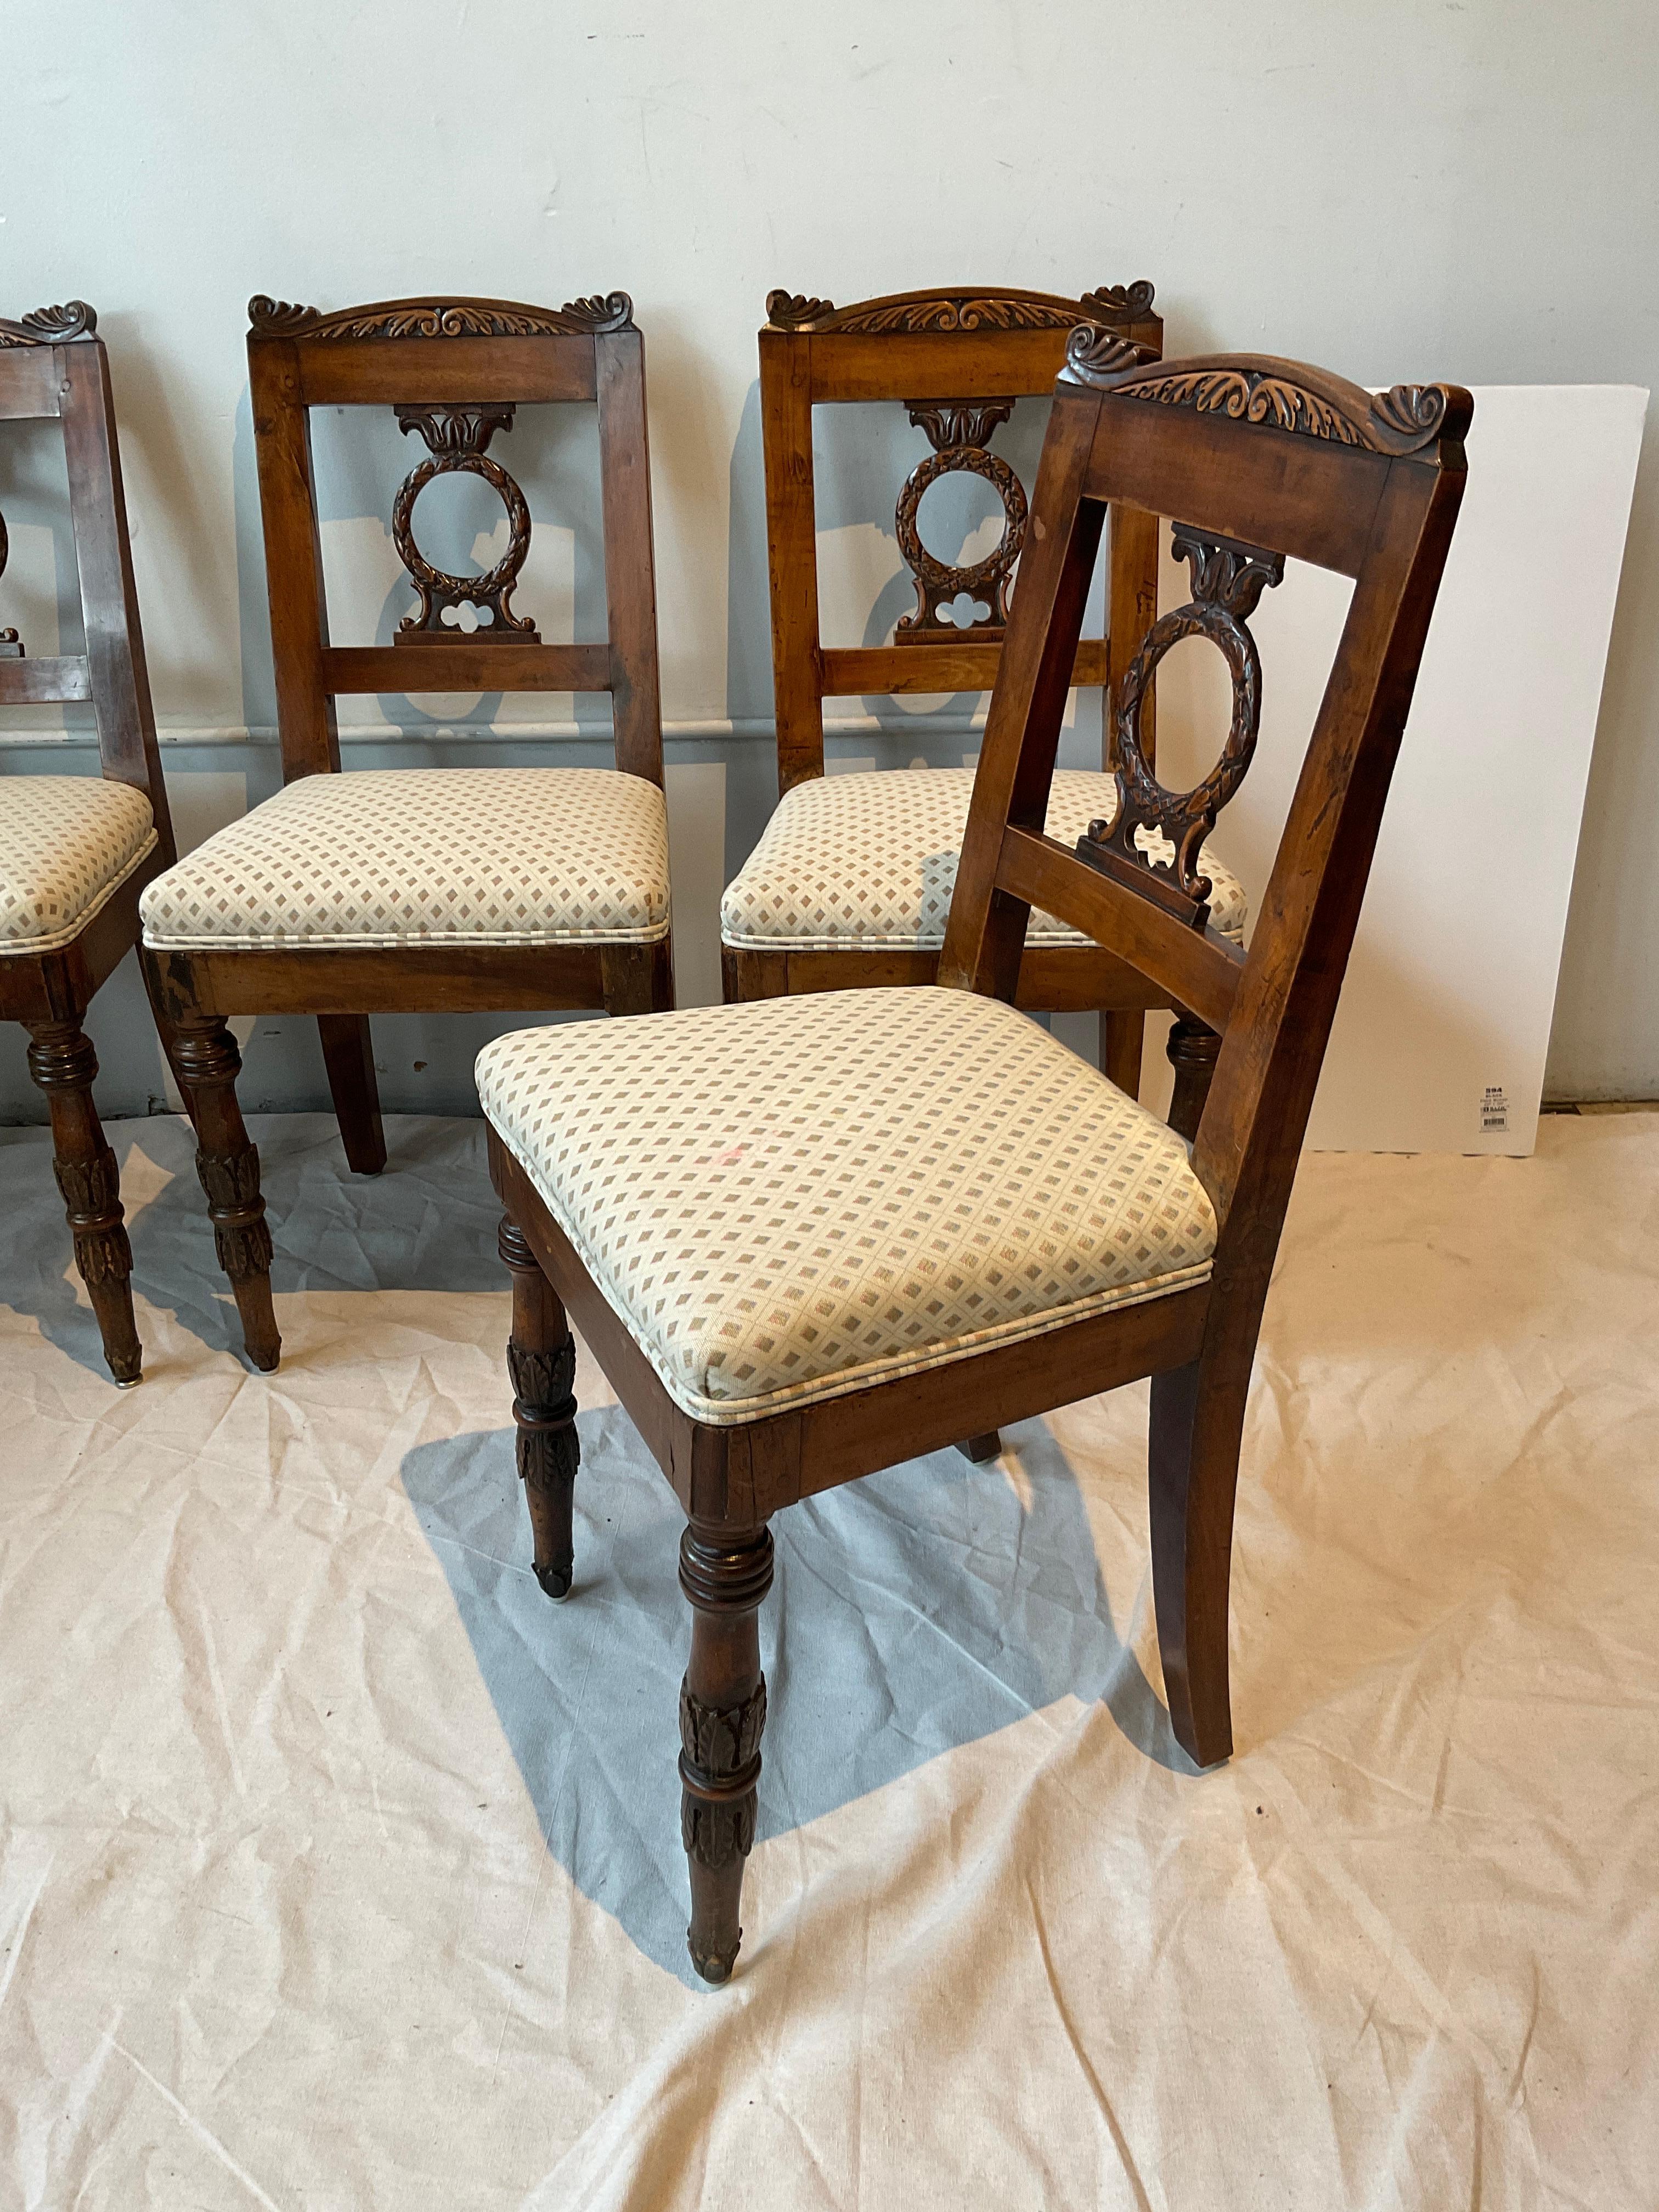 4 Hand carved French classical side chairs. Love the way they used pegs on these chairs.
Stain on one cushion. I did not try to clean it. Chairs need reupholstering.